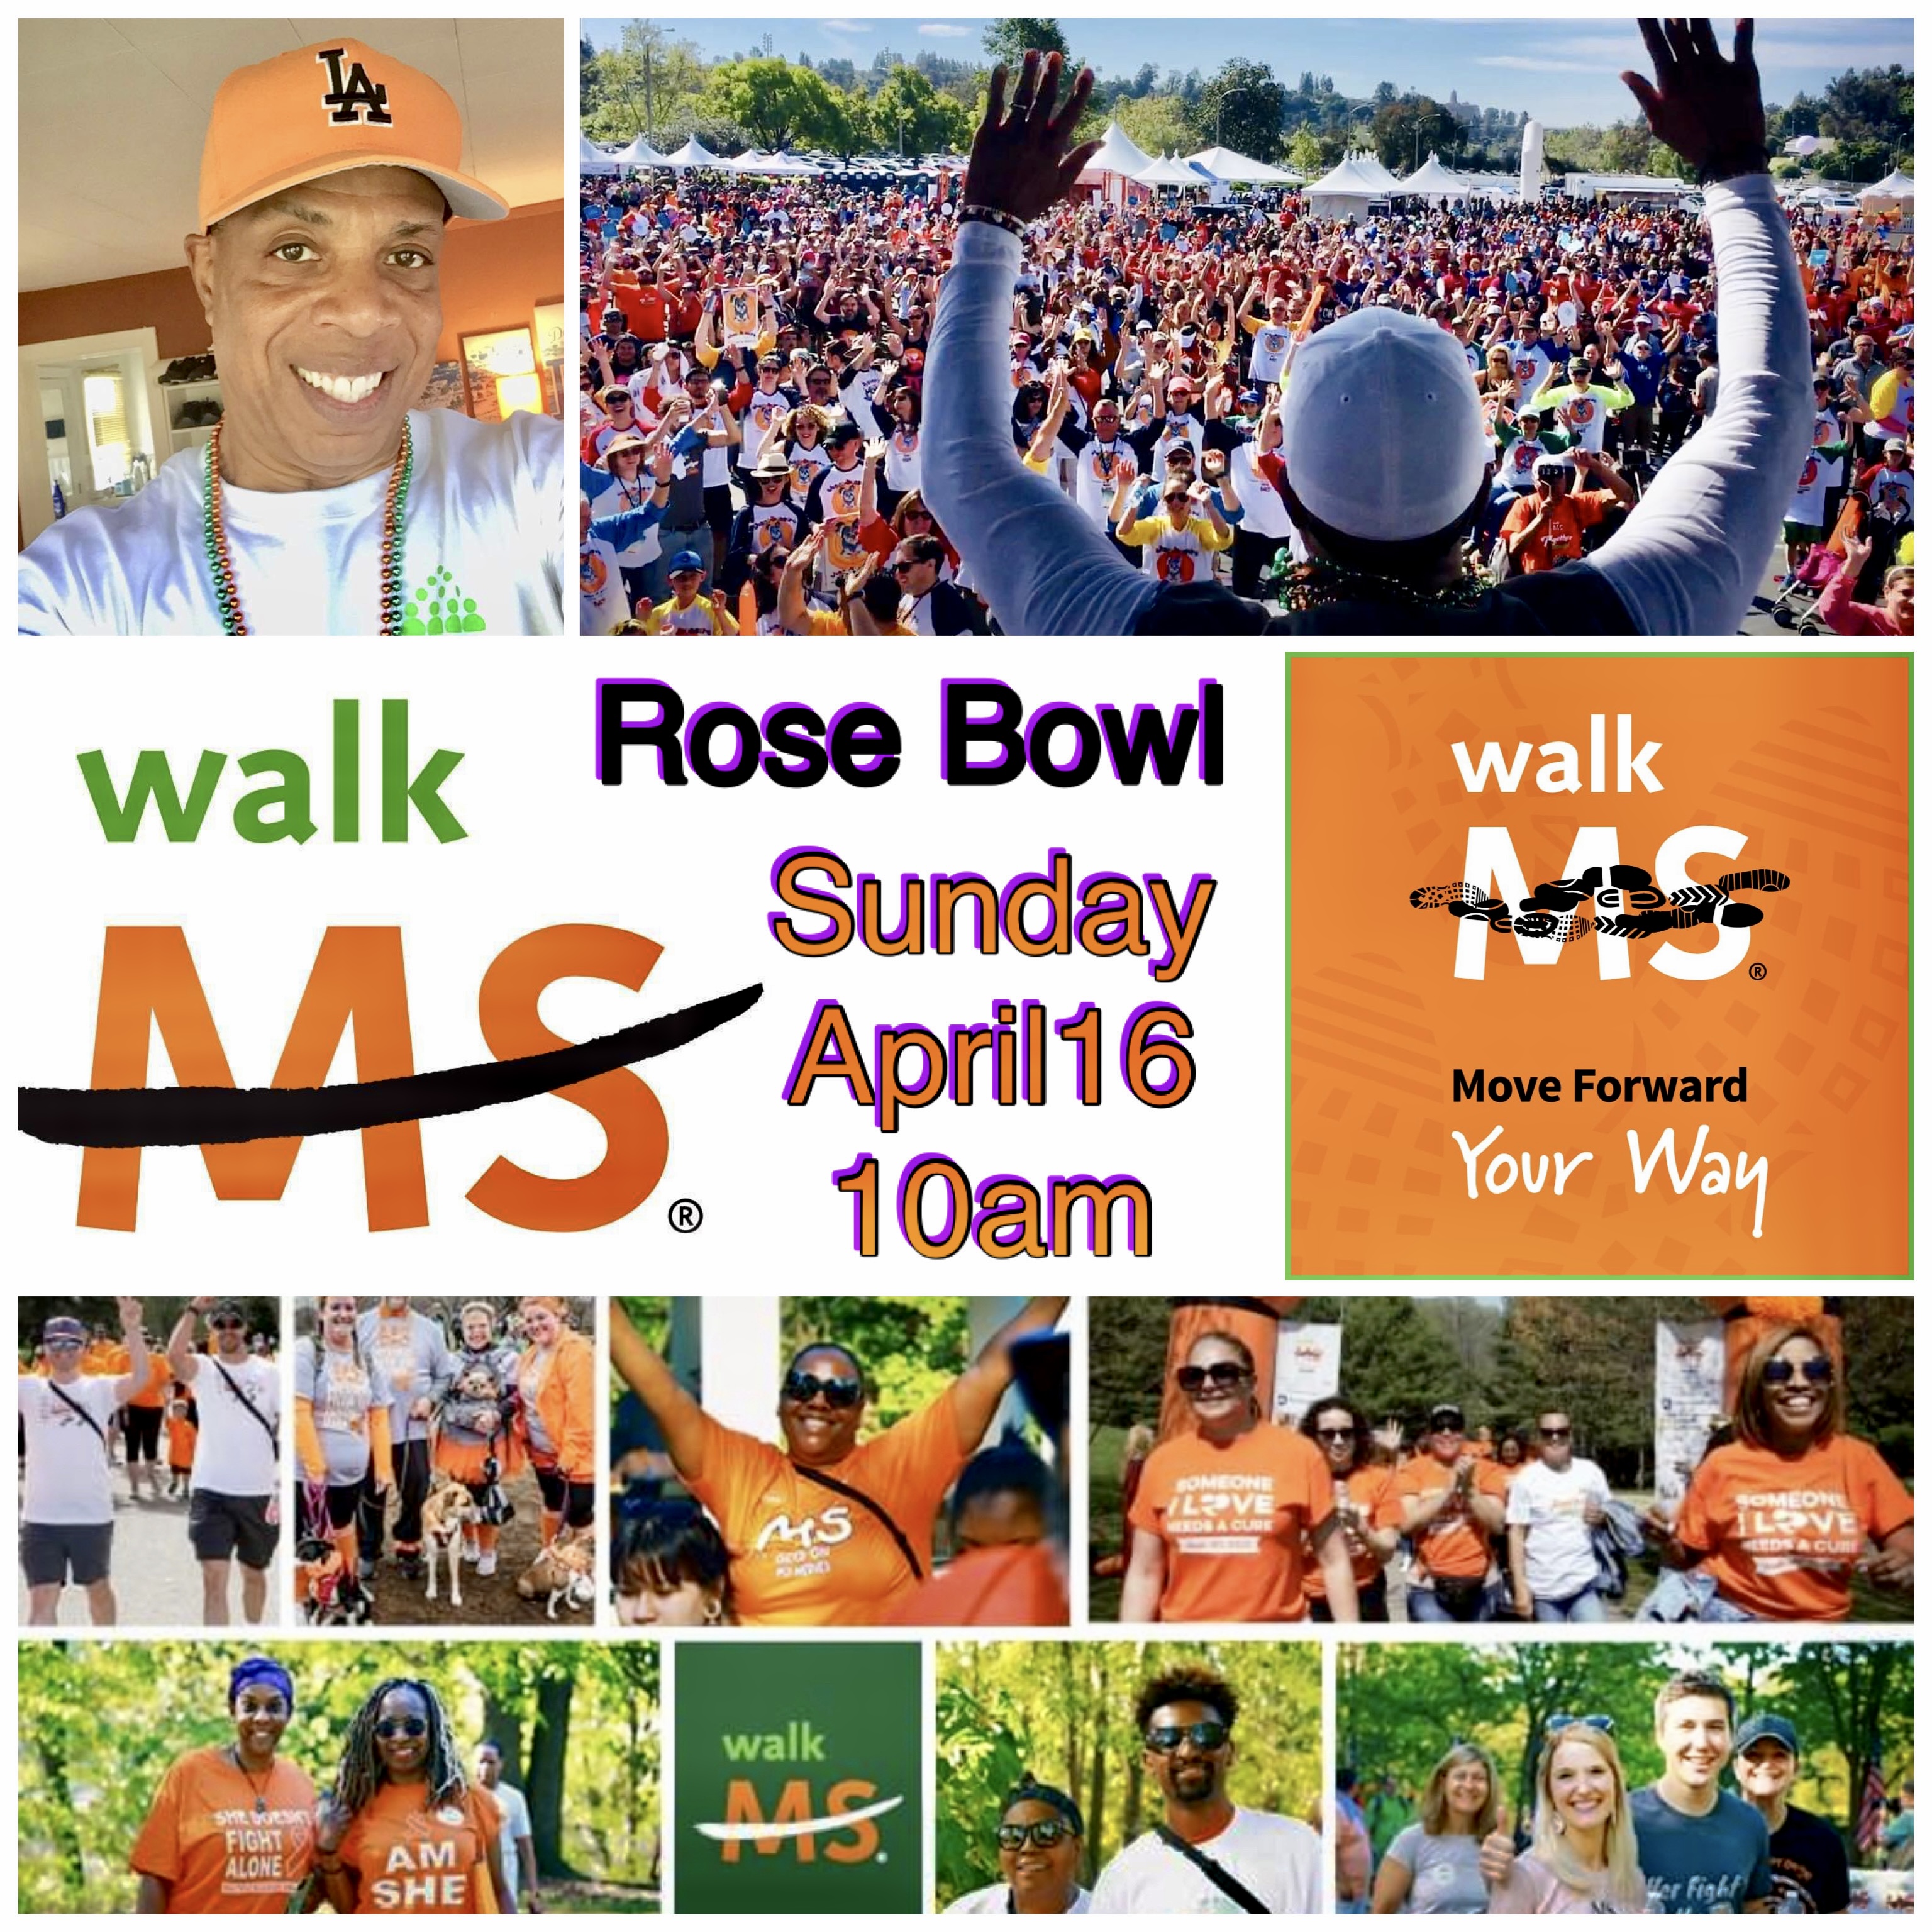 The Charity Fitness Tour rolls to The 2023 WalkMS at The Rose Bowl Stadium Sunday, April 16, 2023.